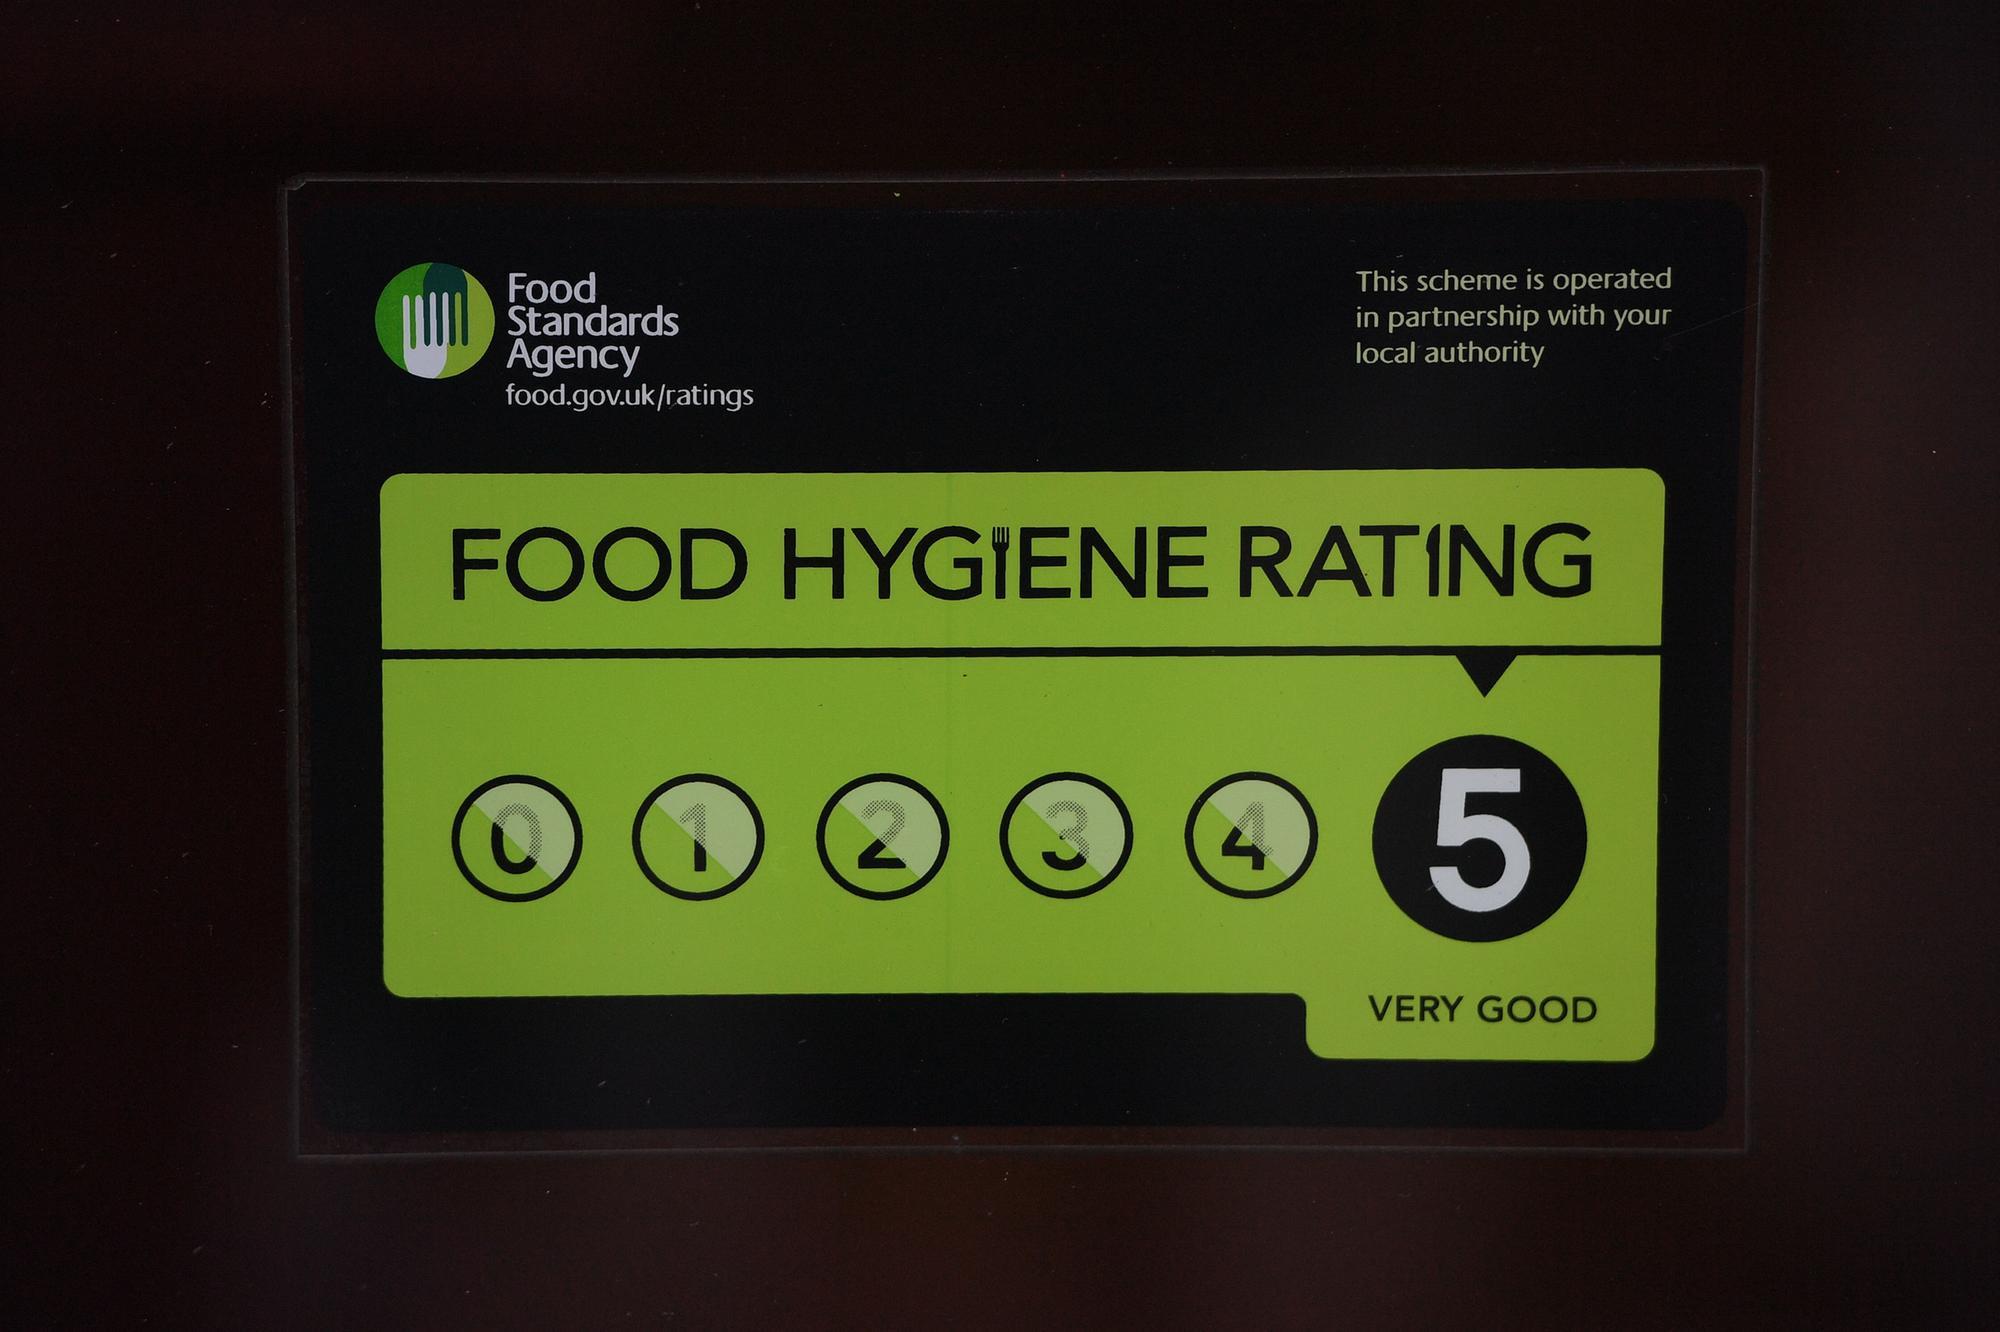 Armagh City, Banbridge and Craigavon restaurant given new food hygiene rating